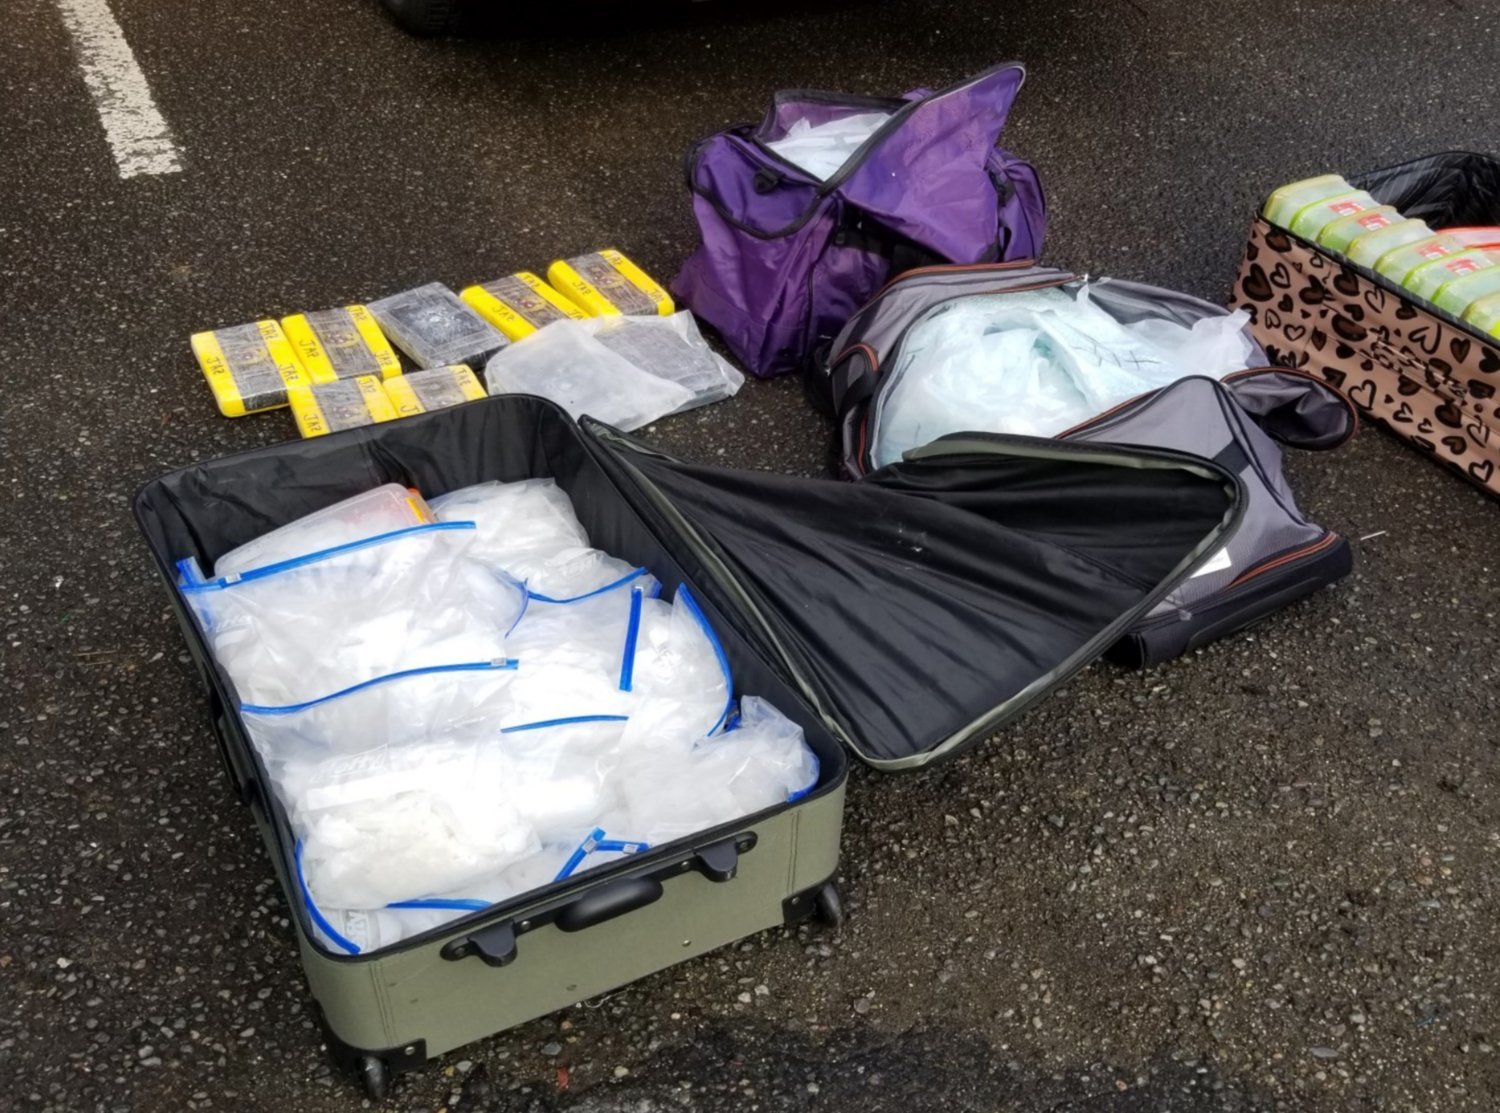 Centralia police and the Joint Narcotics Enforcement Team found 108 pounds of meth, 340,000 fentanyl pills and 19 pounds of fentanyl mixed with cocaine inside a Cruze in November after a traffic stop, the charges say.